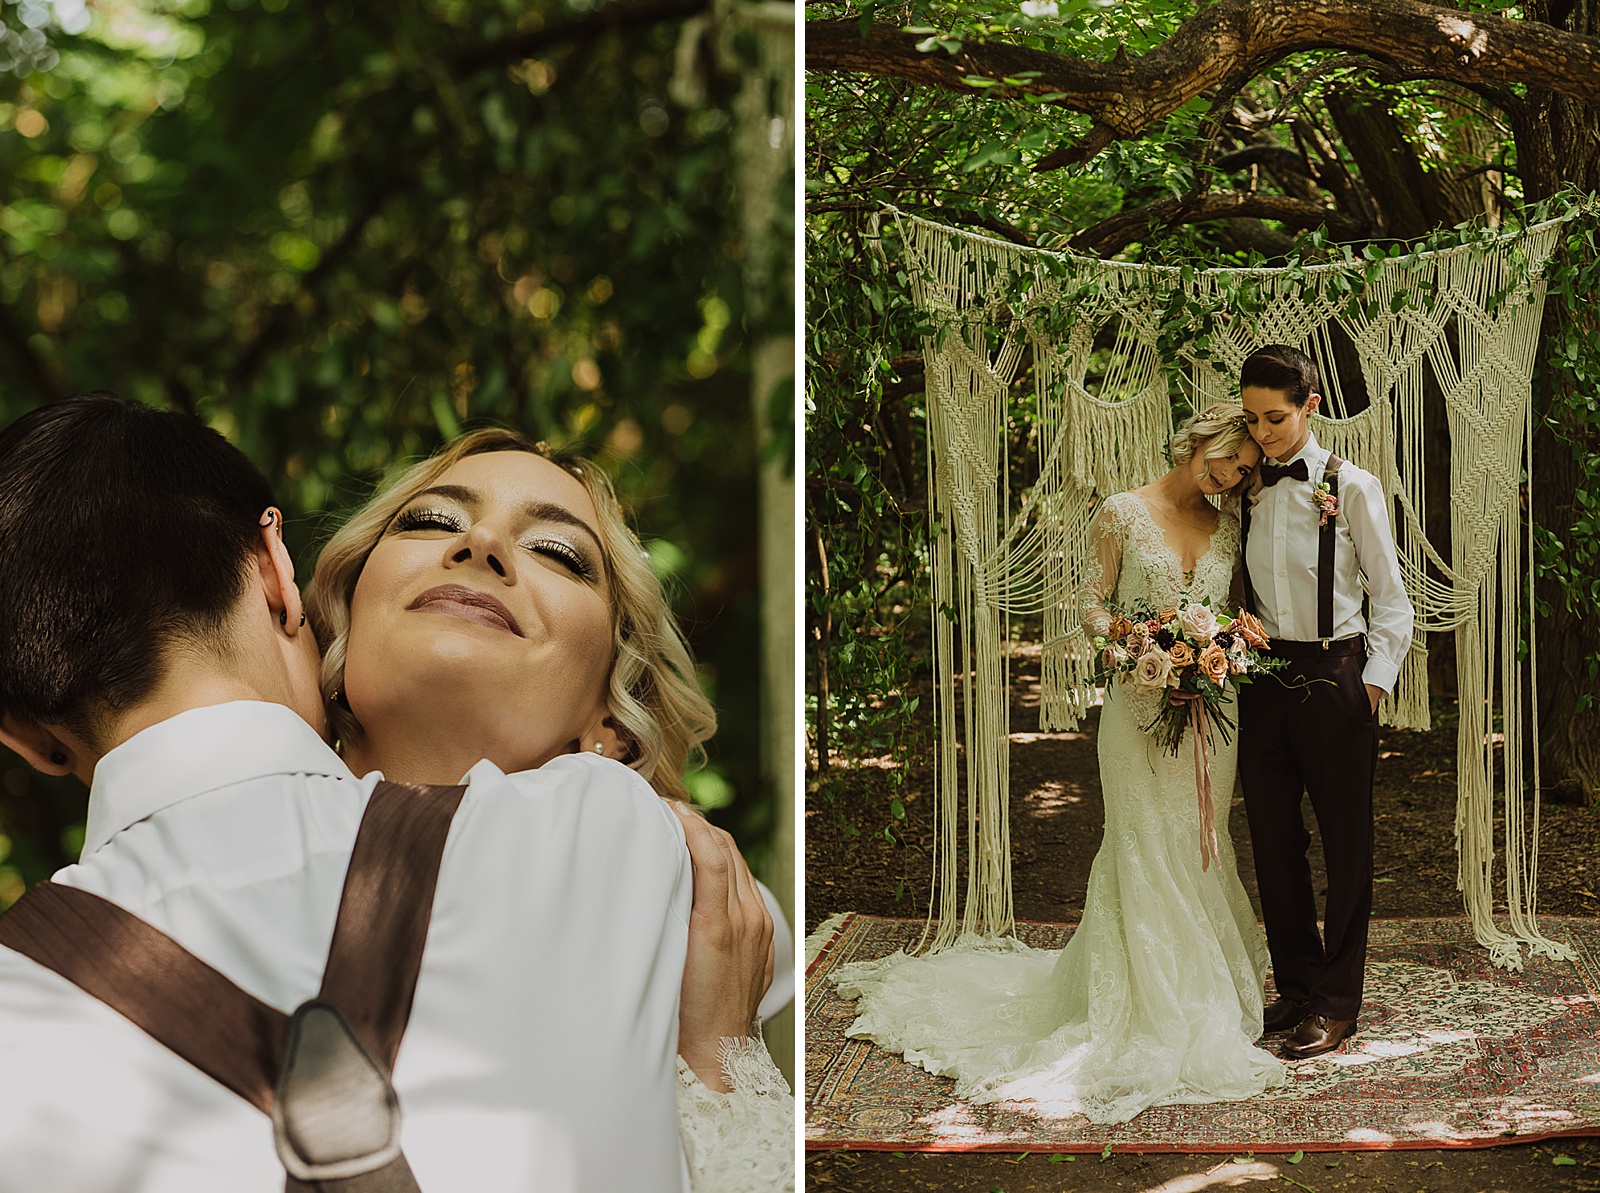 Ceremony Boho Kansas City Styled Elopement captured by Caitlyn Cloud Photography